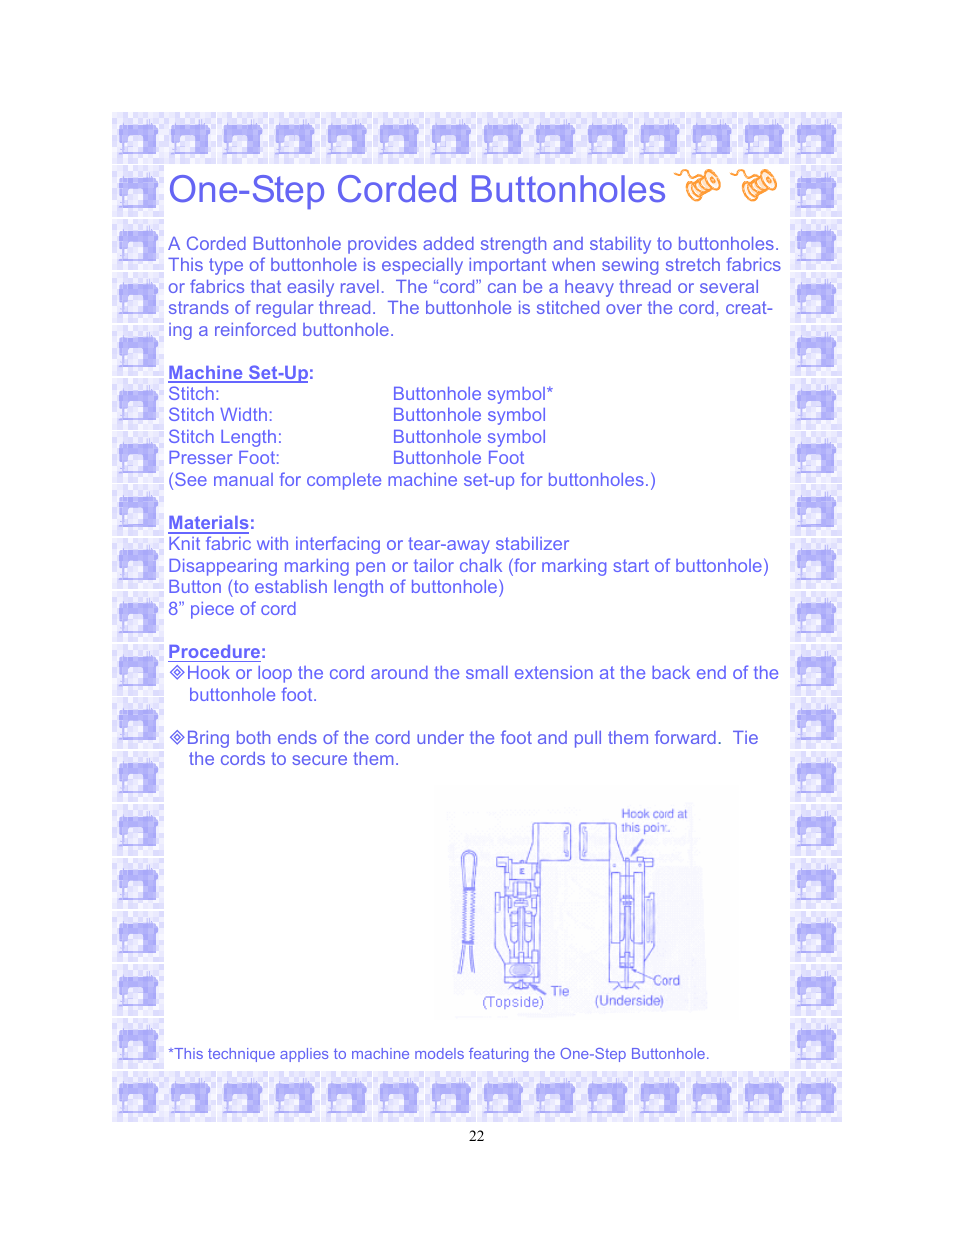 One-step corded buttonholes | SINGER 6550-WORKBOOK Scholastic User Manual | Page 26 / 59